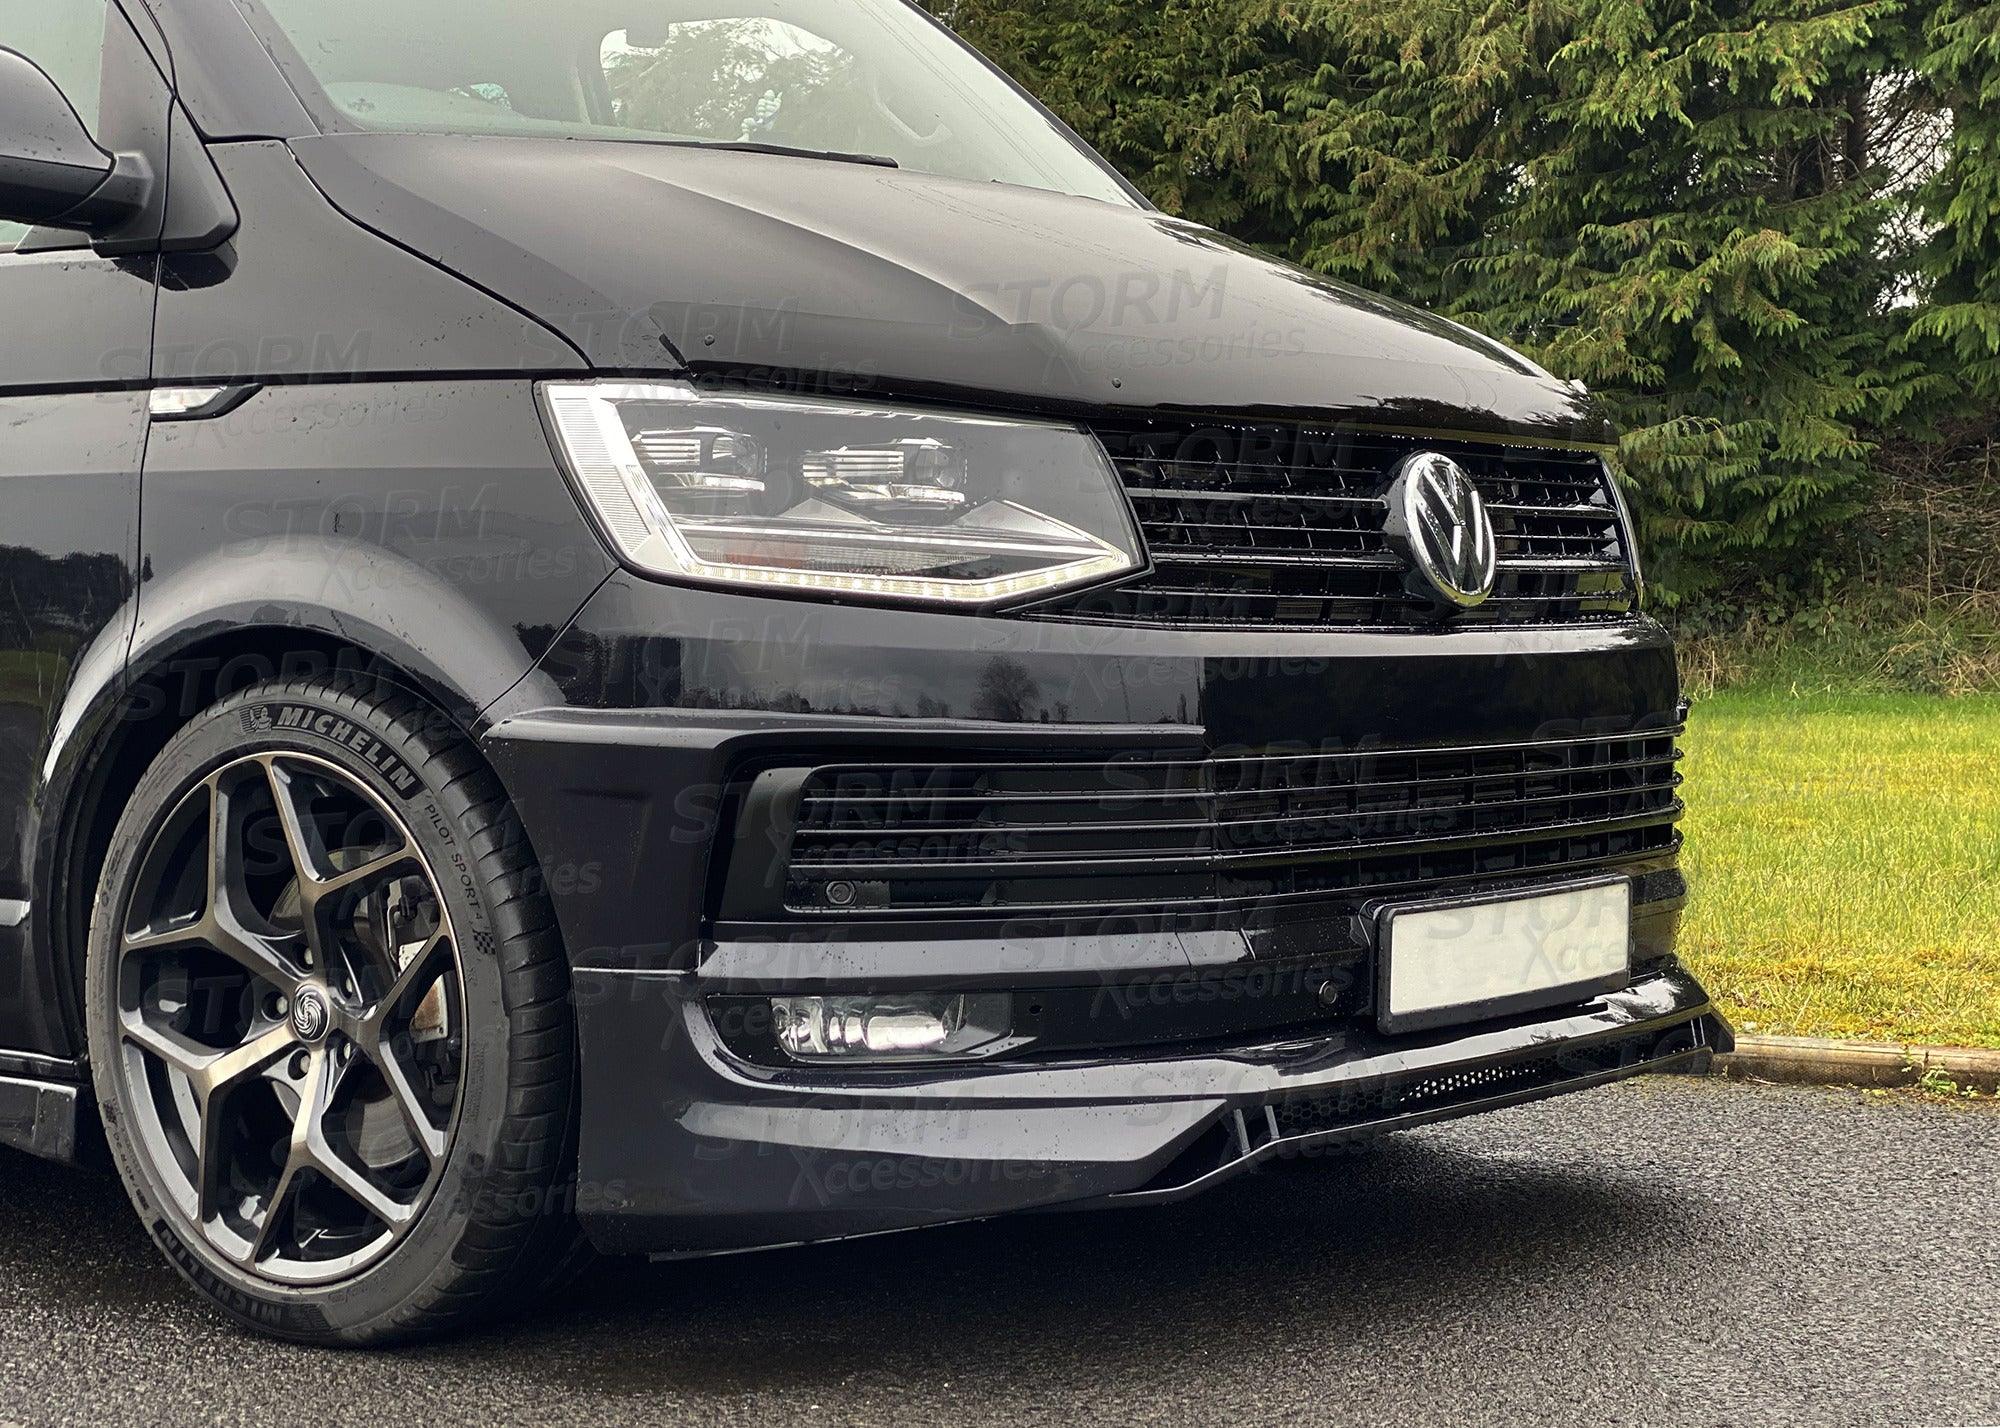 VW TRANSPORTER T6 - ABT STYLED FULL BODY KIT - UPGRADE *SUPPLY AND FIT ONLY* - Storm Xccessories2